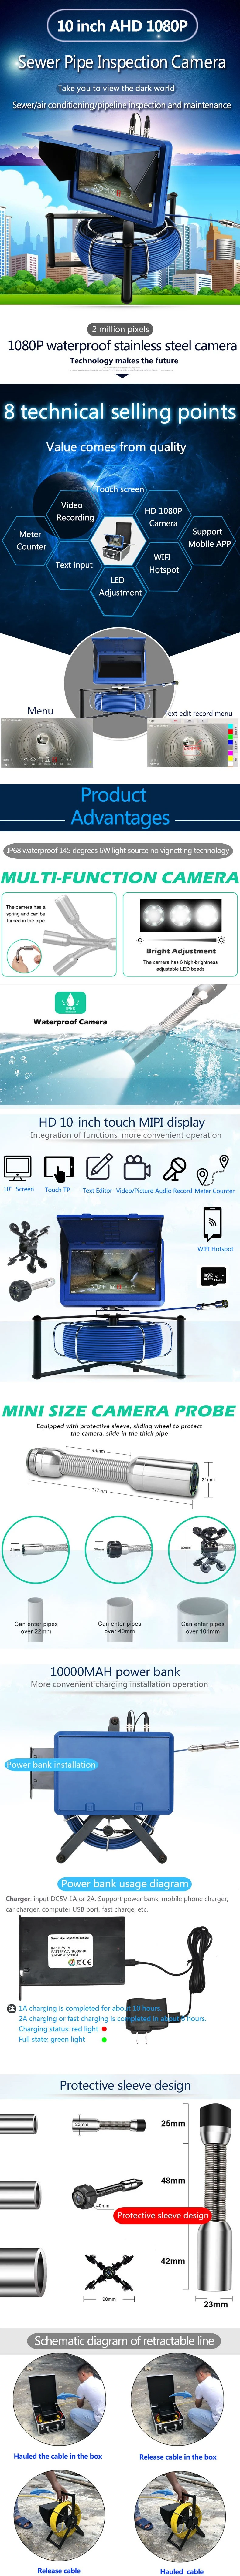 Handheld Industrial Pipe/Sewer Drain Inspection Video Camera with WiFi Wireless/Meter Counter